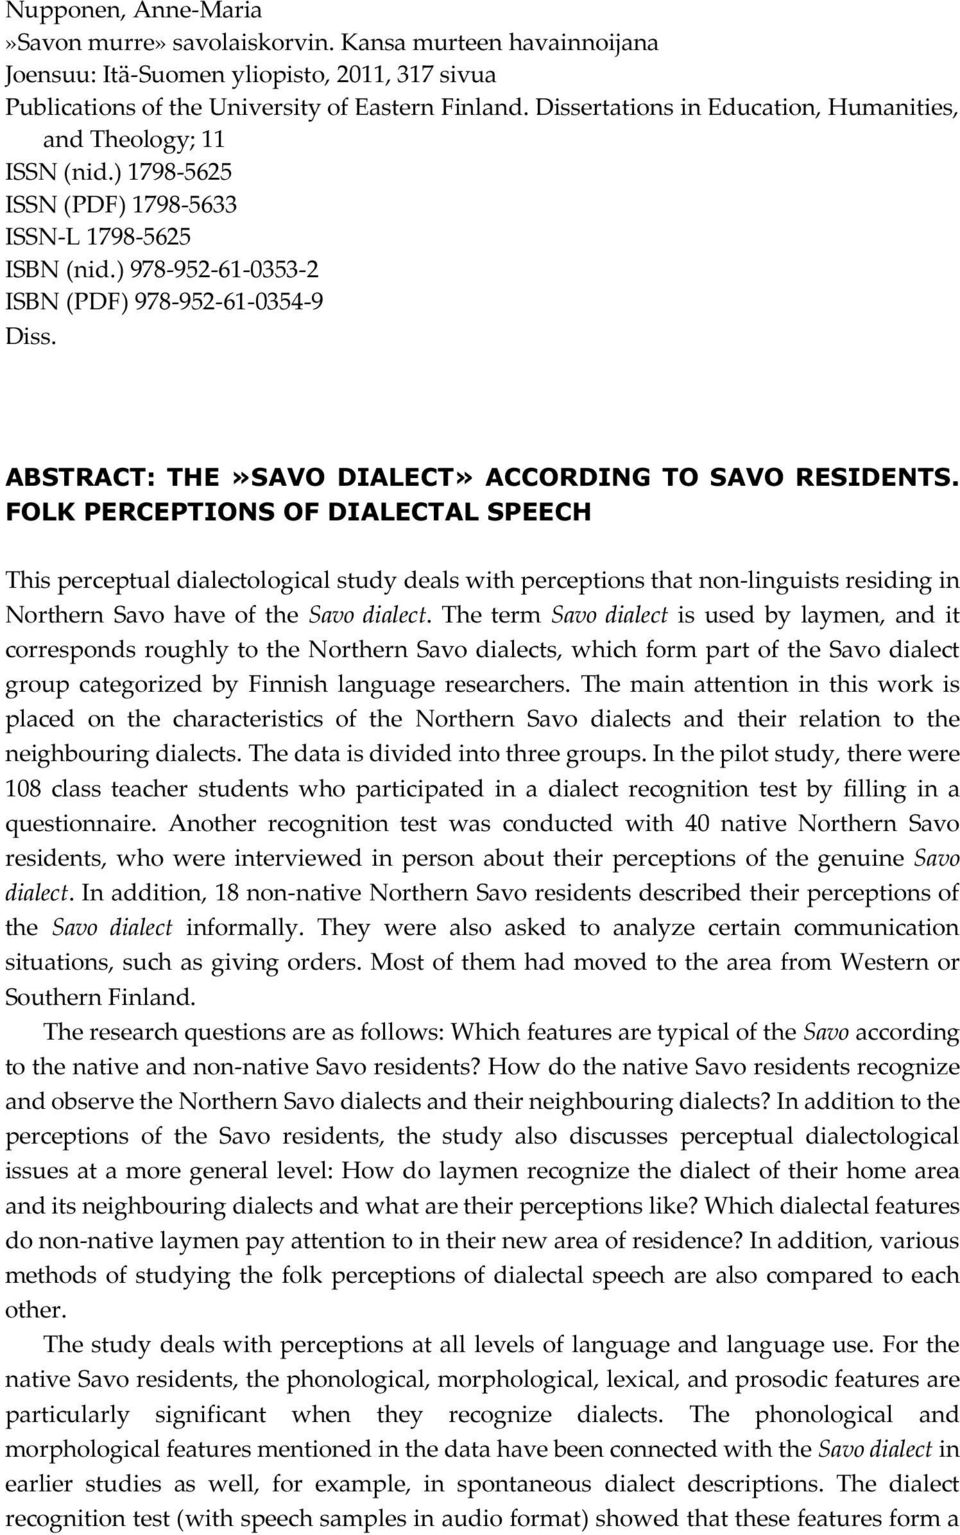 ABSTRACT: THE»SAVO DIALECT» ACCORDING TO SAVO RESIDENTS.